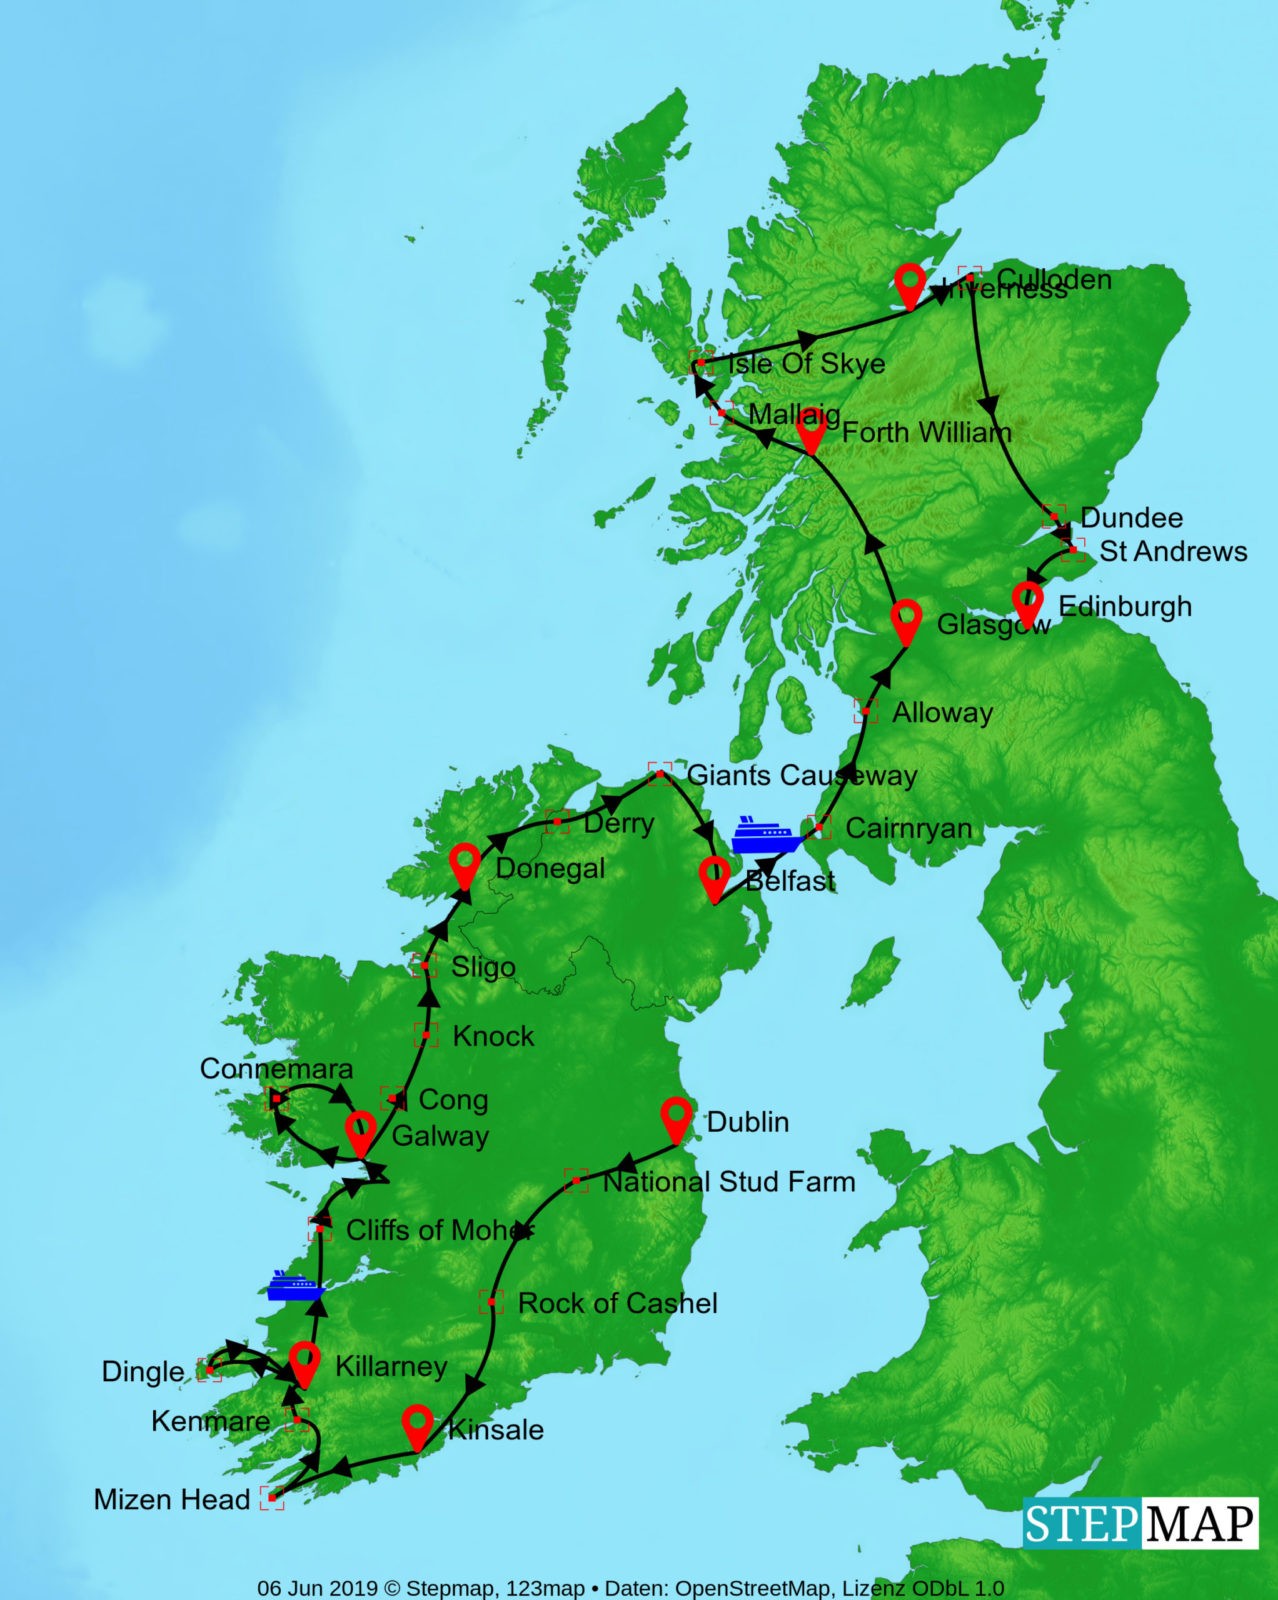 tours of ireland scotland and wales